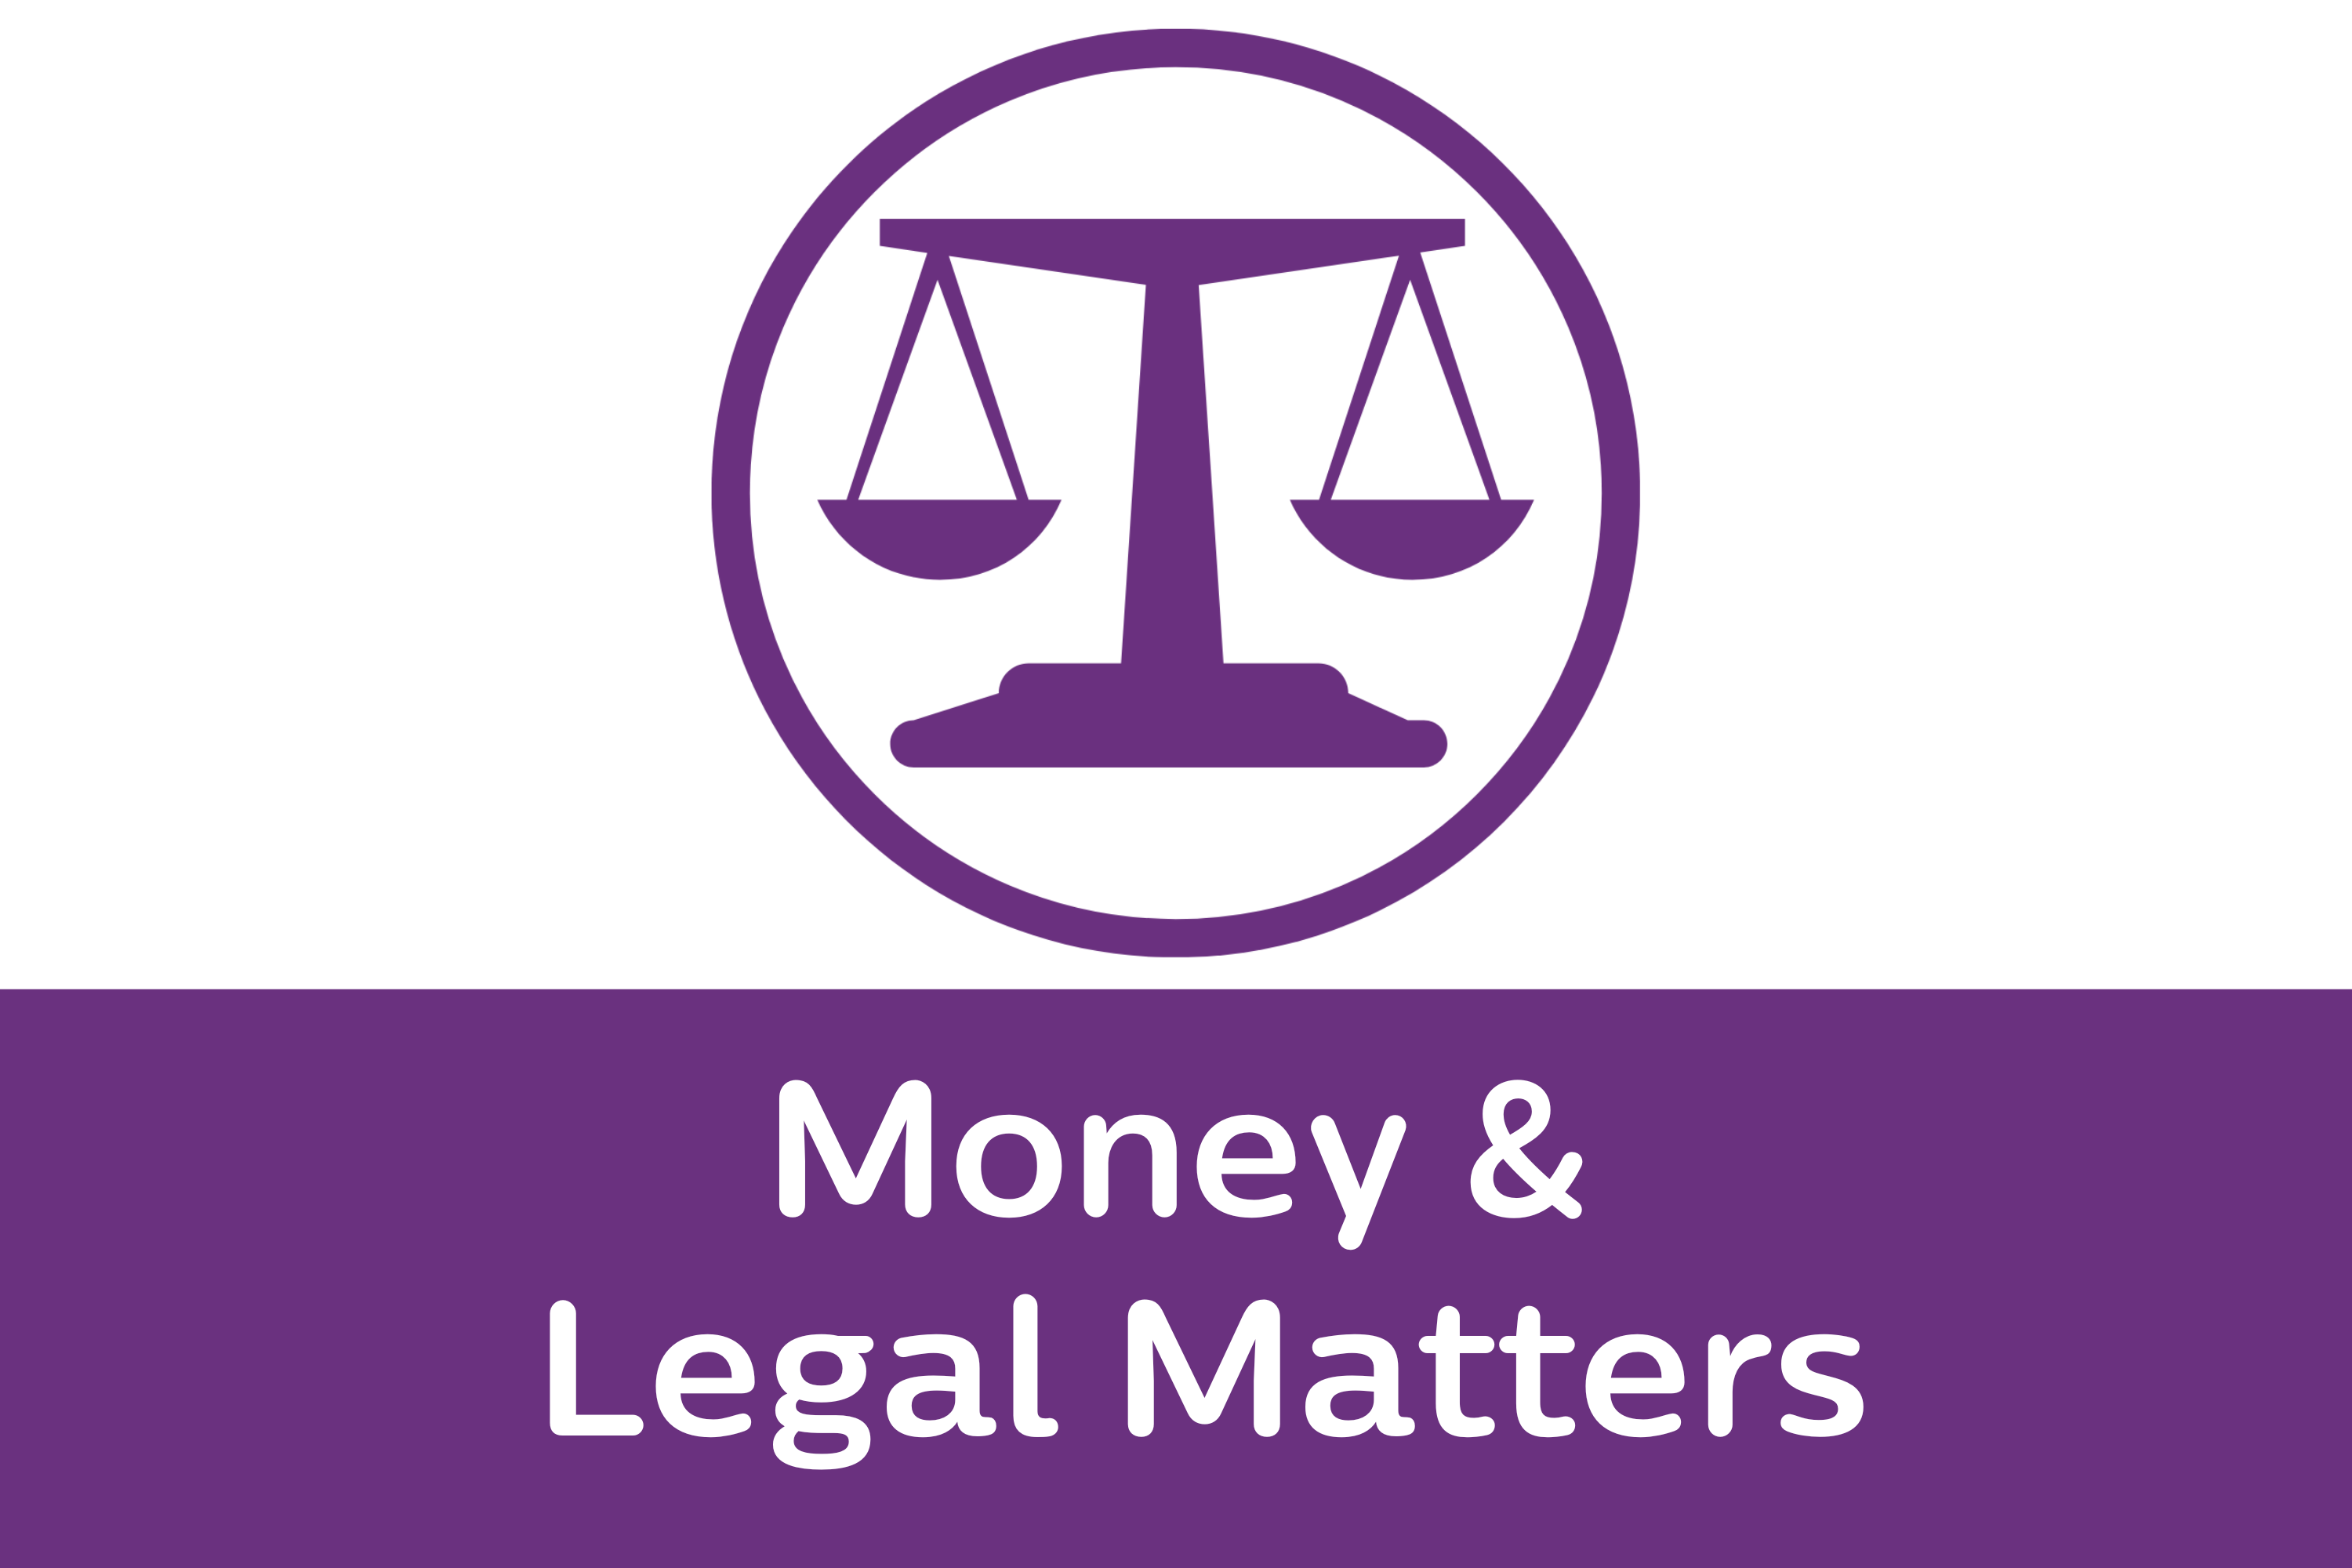 Money & Legal Matters Priority Action Area for the Disability Expo